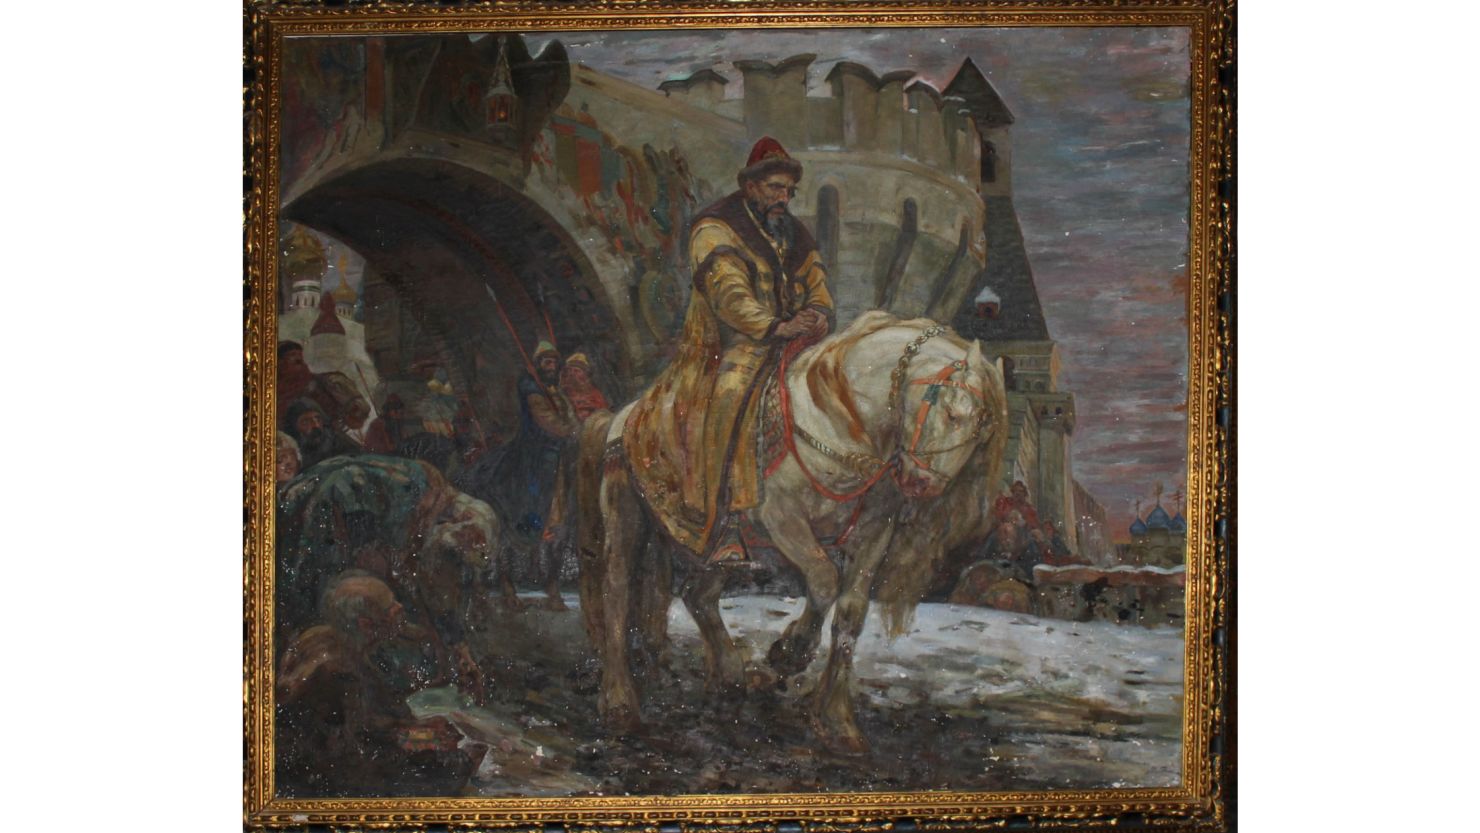 The stolen painting, "Secret Departure of Ivan the Terrible Before the Oprichina" by Mikhail Panin, was recovered in Connecticut after being missing for decades.